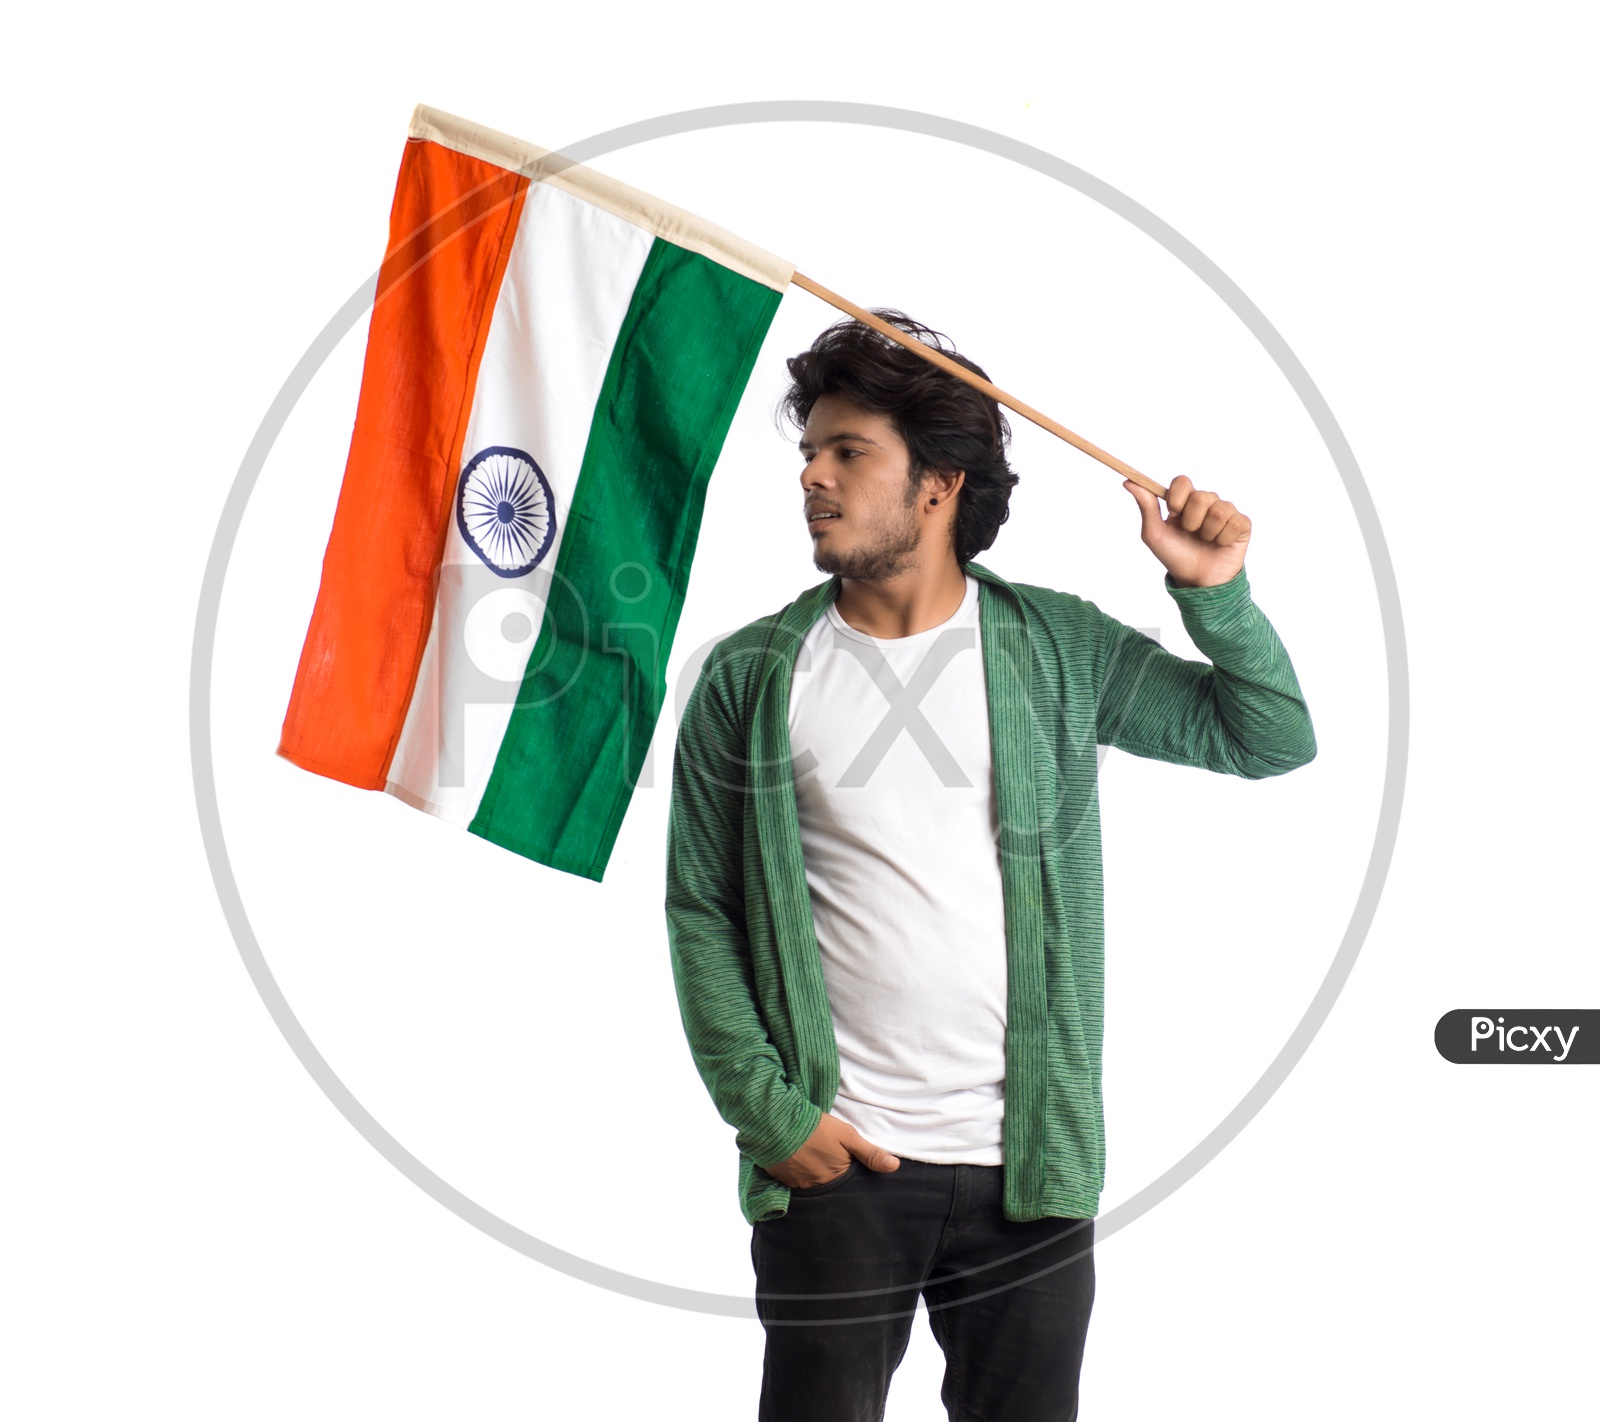 A Young Indian man Waving   Indian National Flag ( Tri Color )  In Hands And Posing Over a White Isolated Background